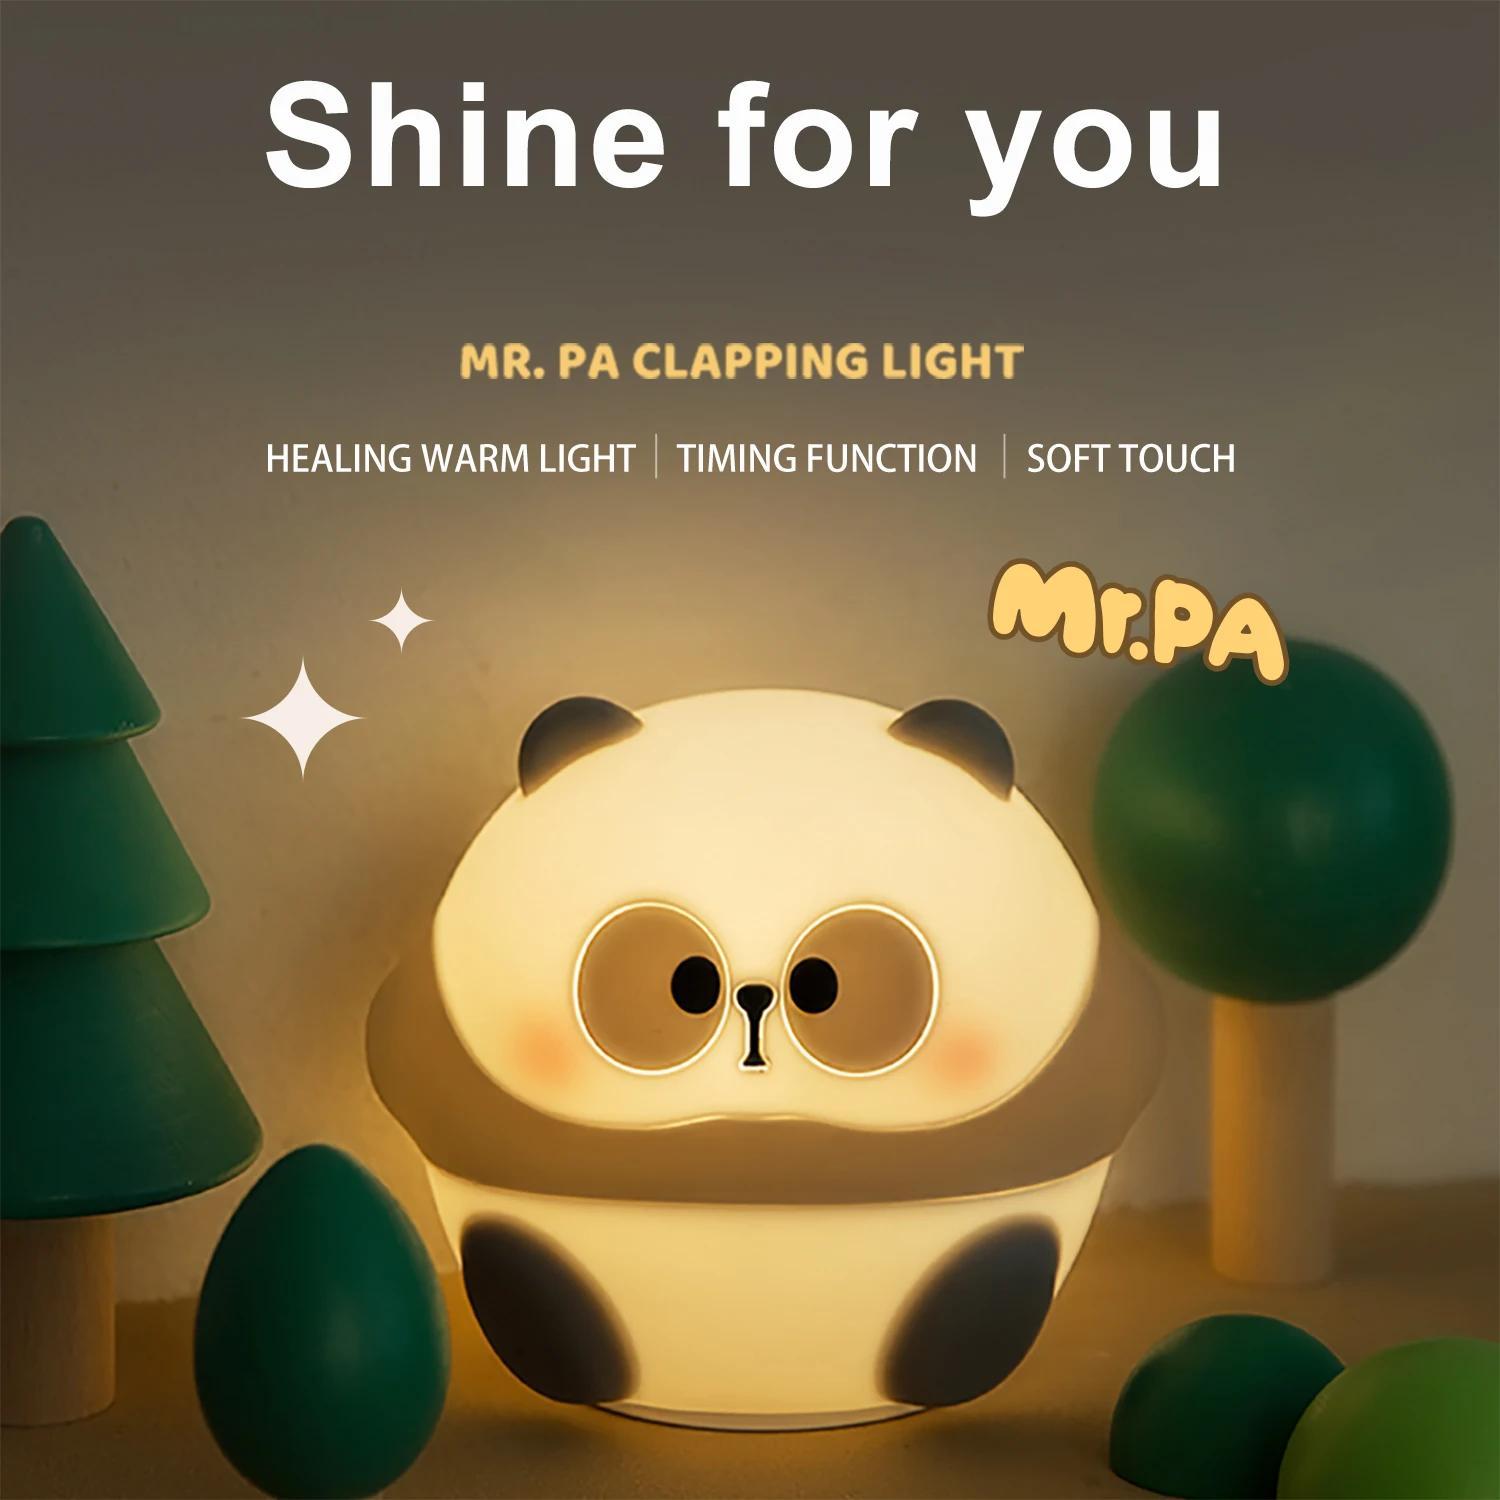 1pc LED Night Light, Cute Panda Cartoon Animals Silicone Lamp, USB Rechargeable Timing Sleeping Lamp, Creative Bedroom Bedside Lamp, For Home Decoration Festival/Birthday Gifts details 1